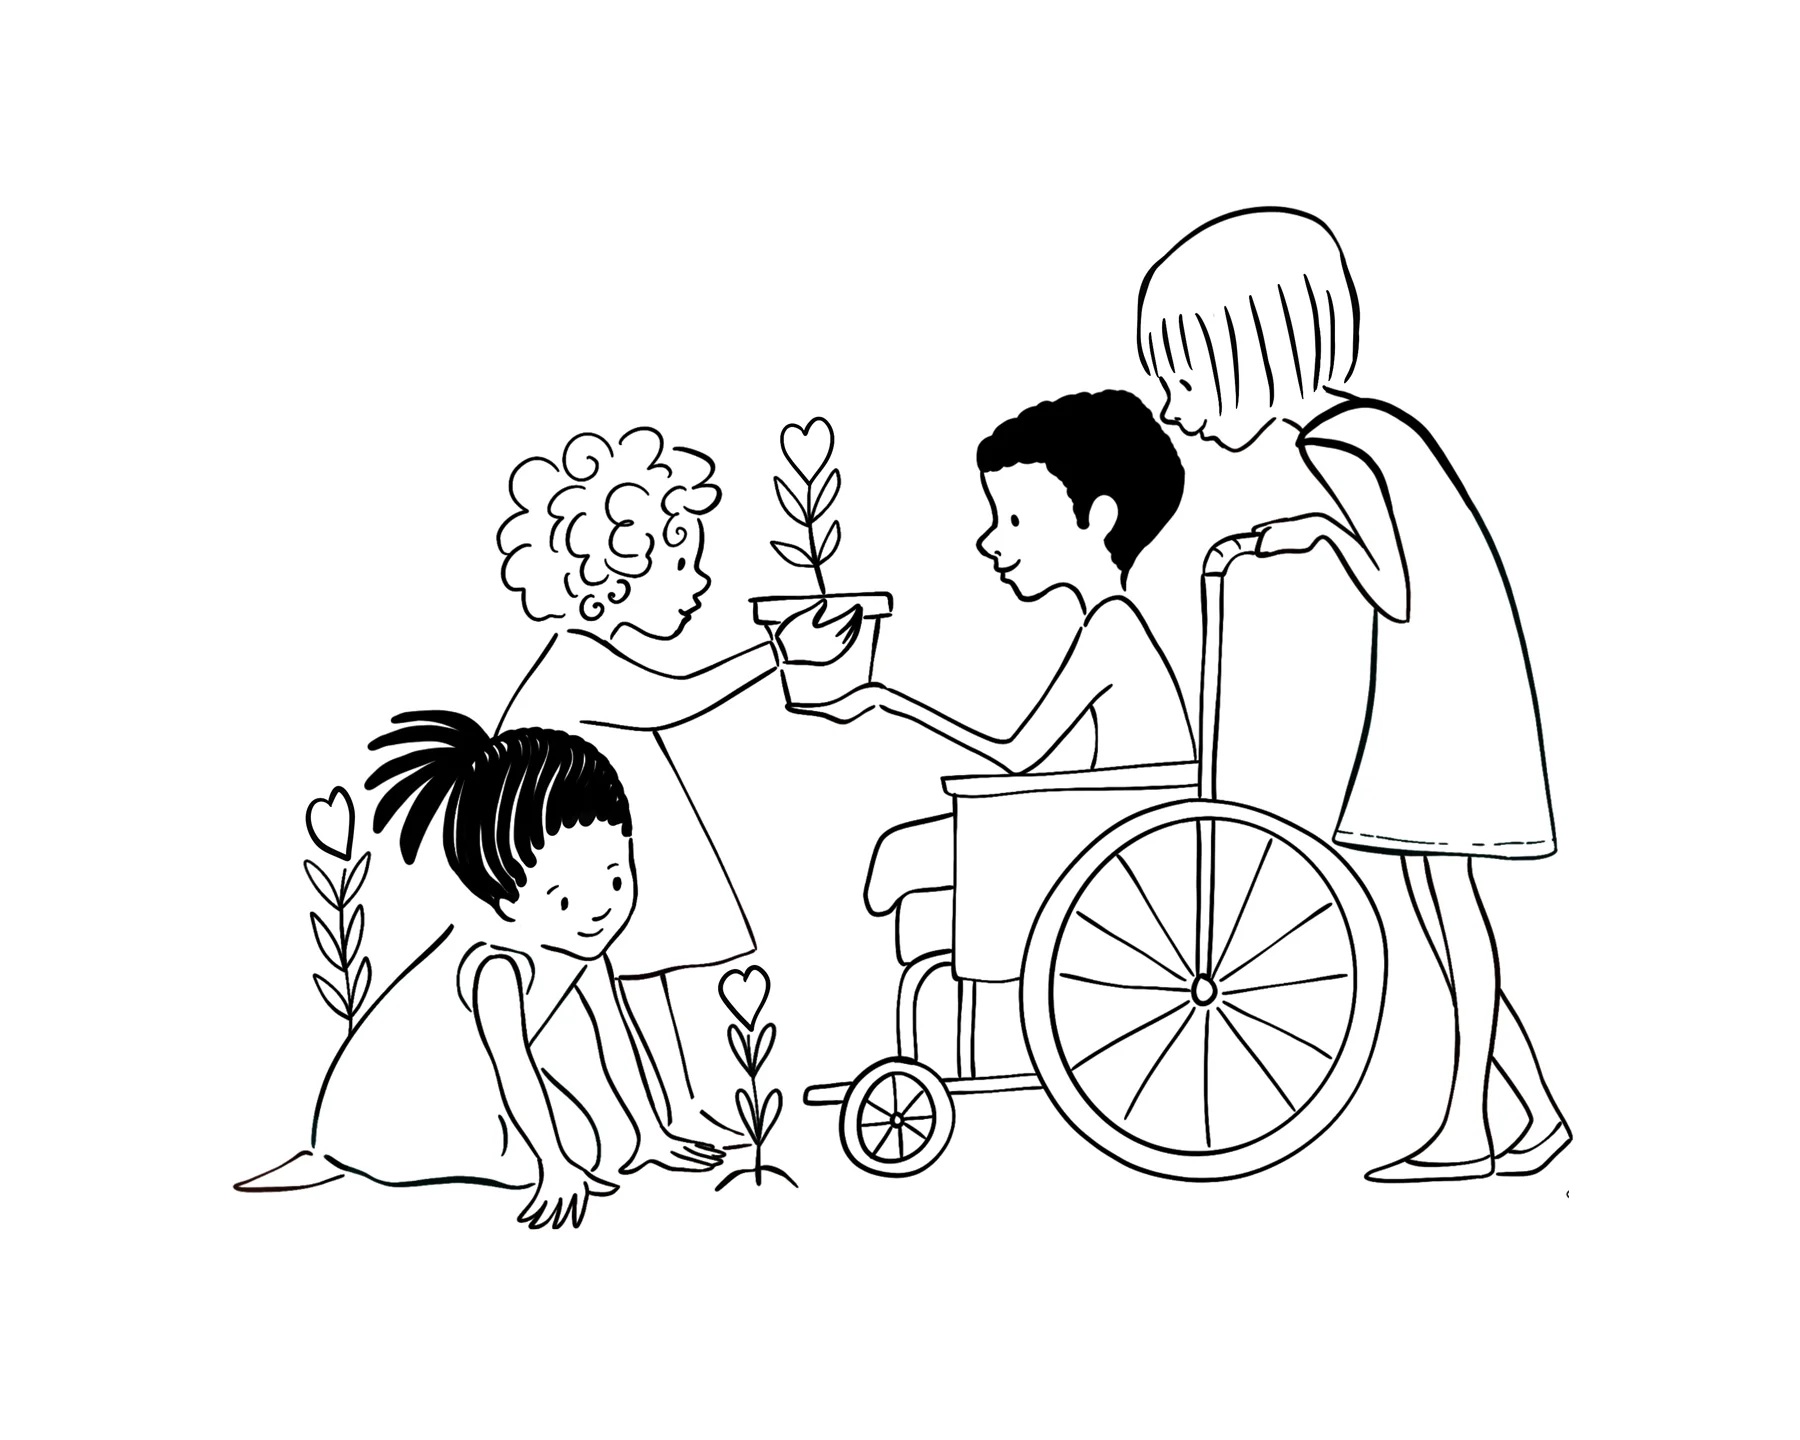 Kids With Wheelchair coloring page - Download, Print or Color Online ...